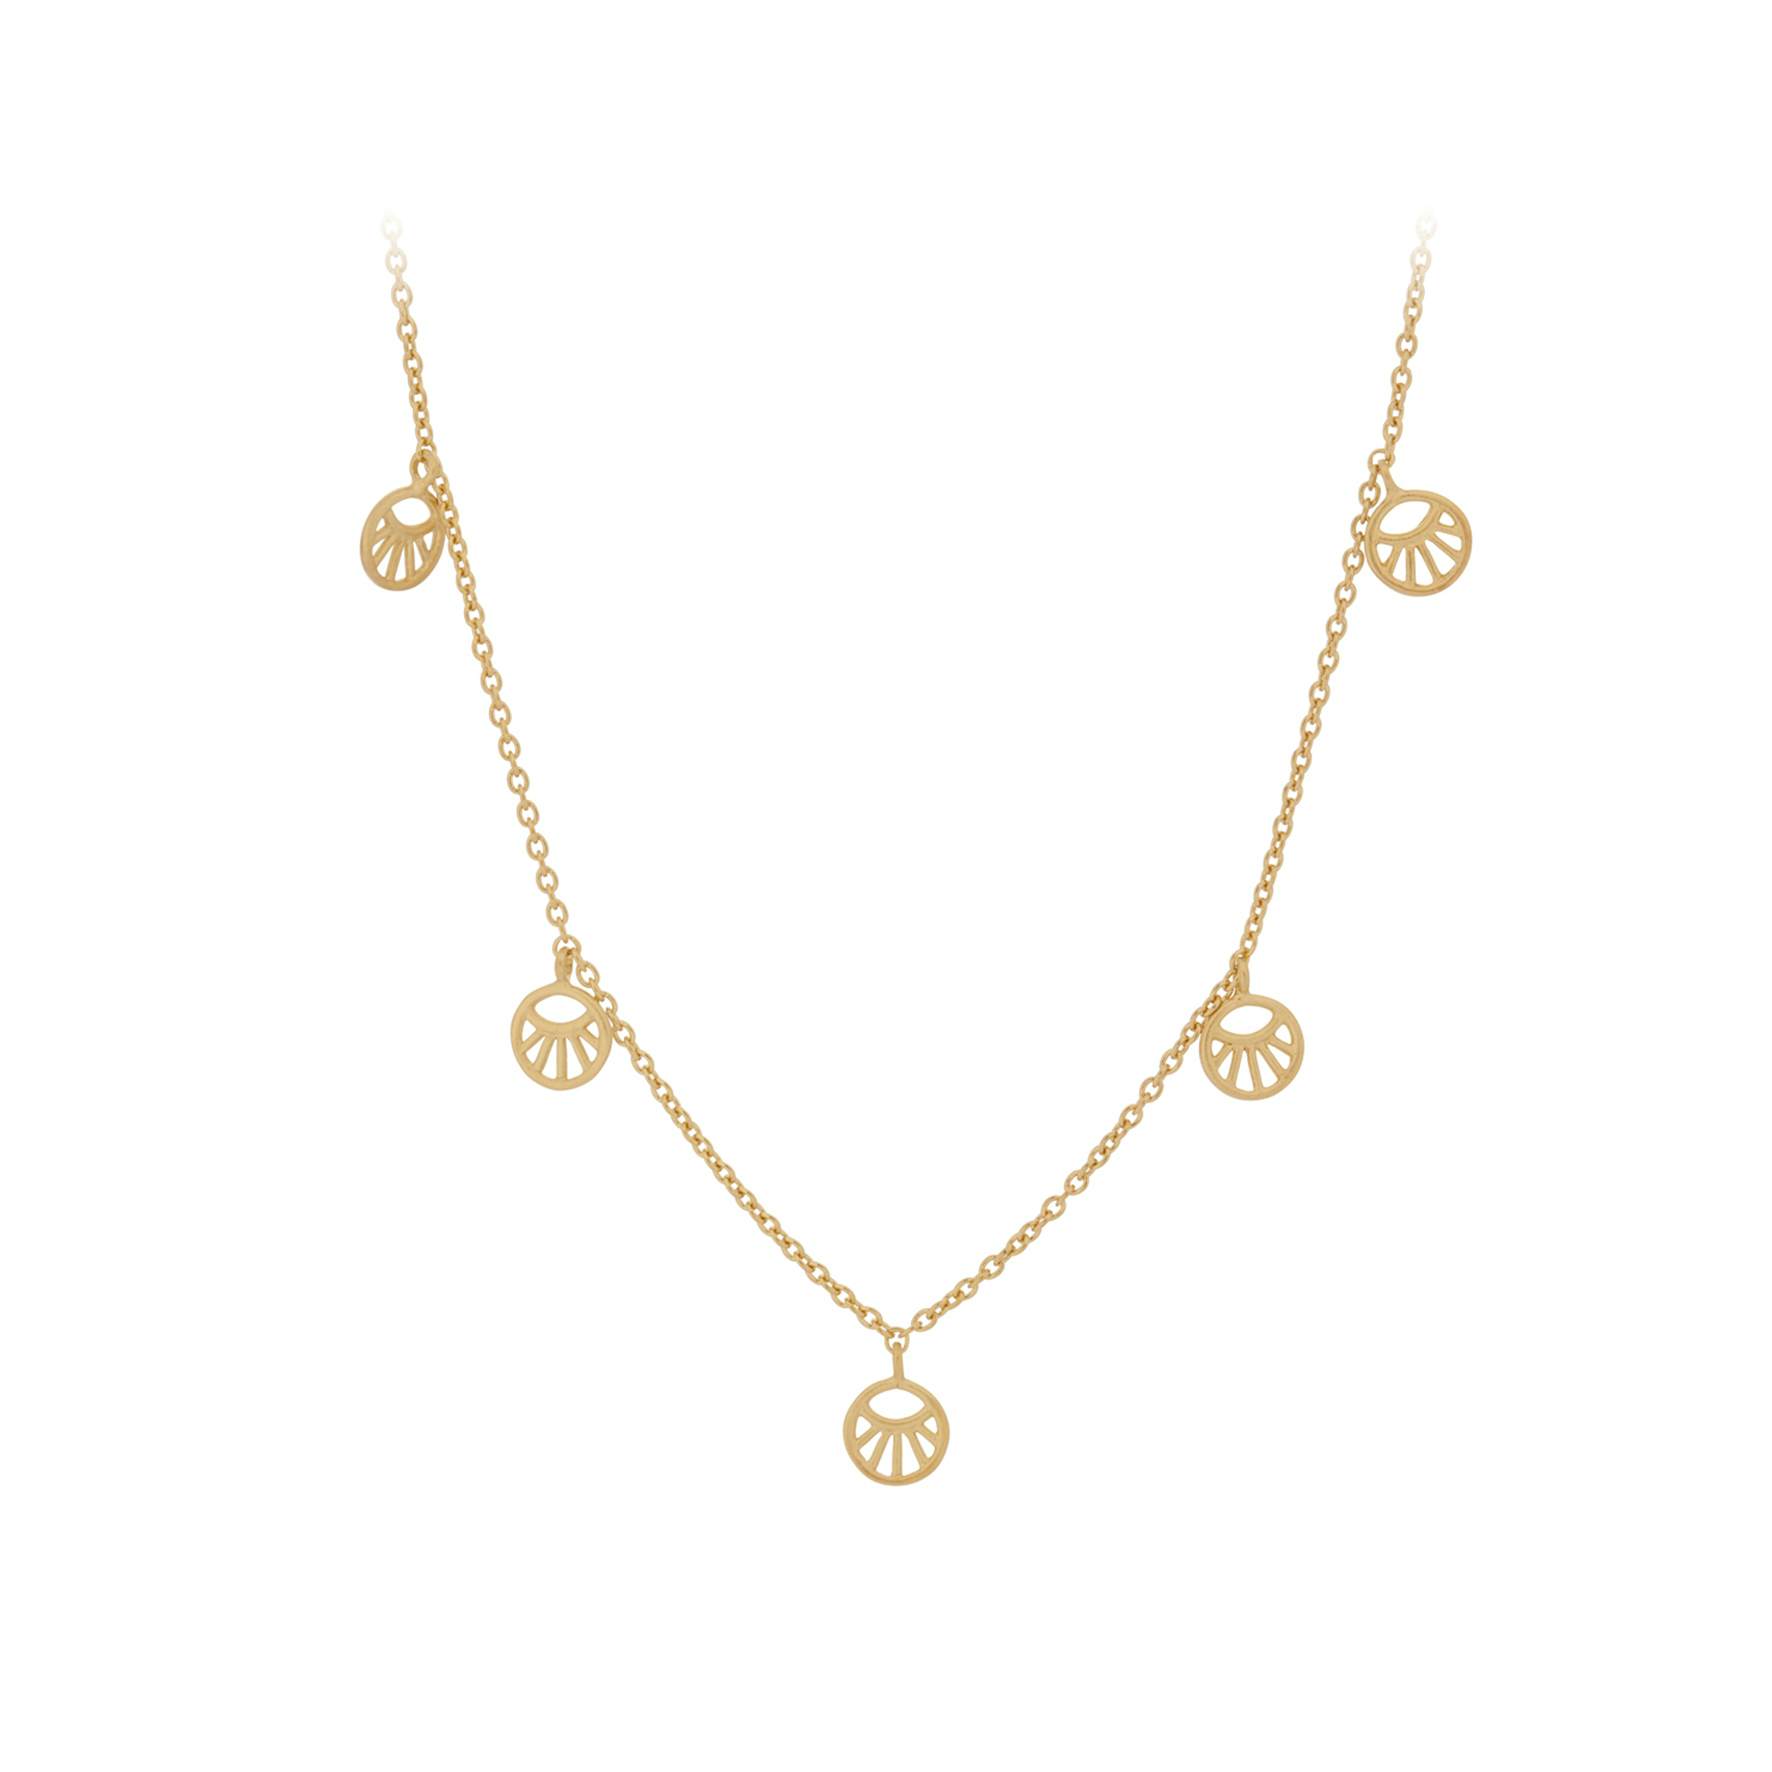 Daylight Necklace from Pernille Corydon in Goldplated-Silver Sterling